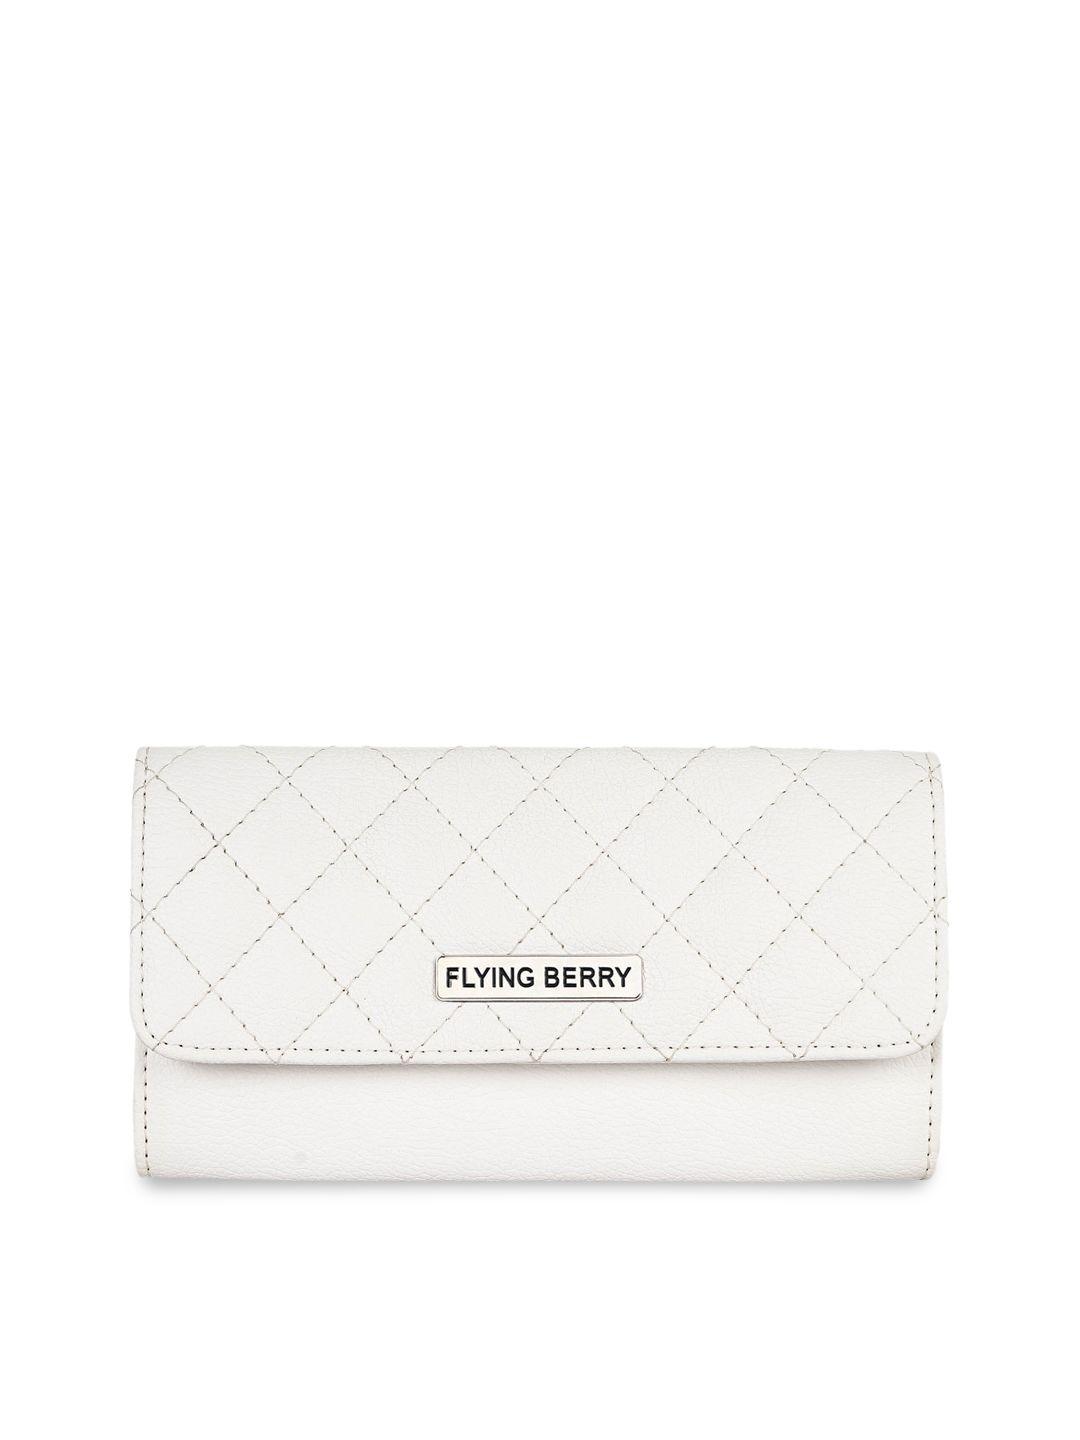 flying berry white checked quilted purse clutch